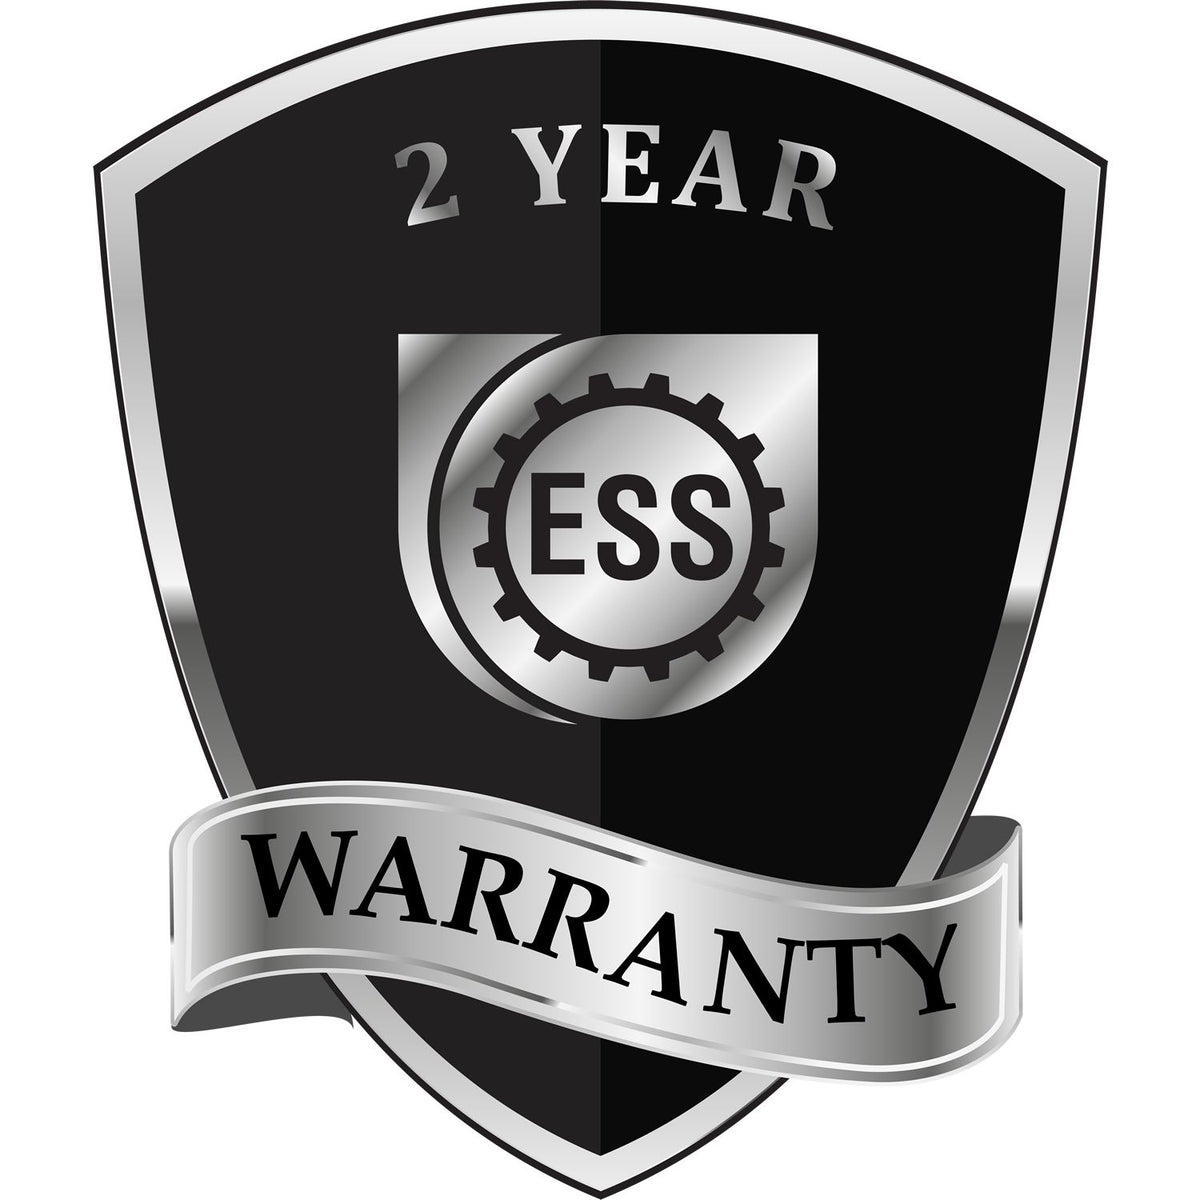 A badge or emblem showing a warranty icon for the Massachusetts Engineer Desk Seal